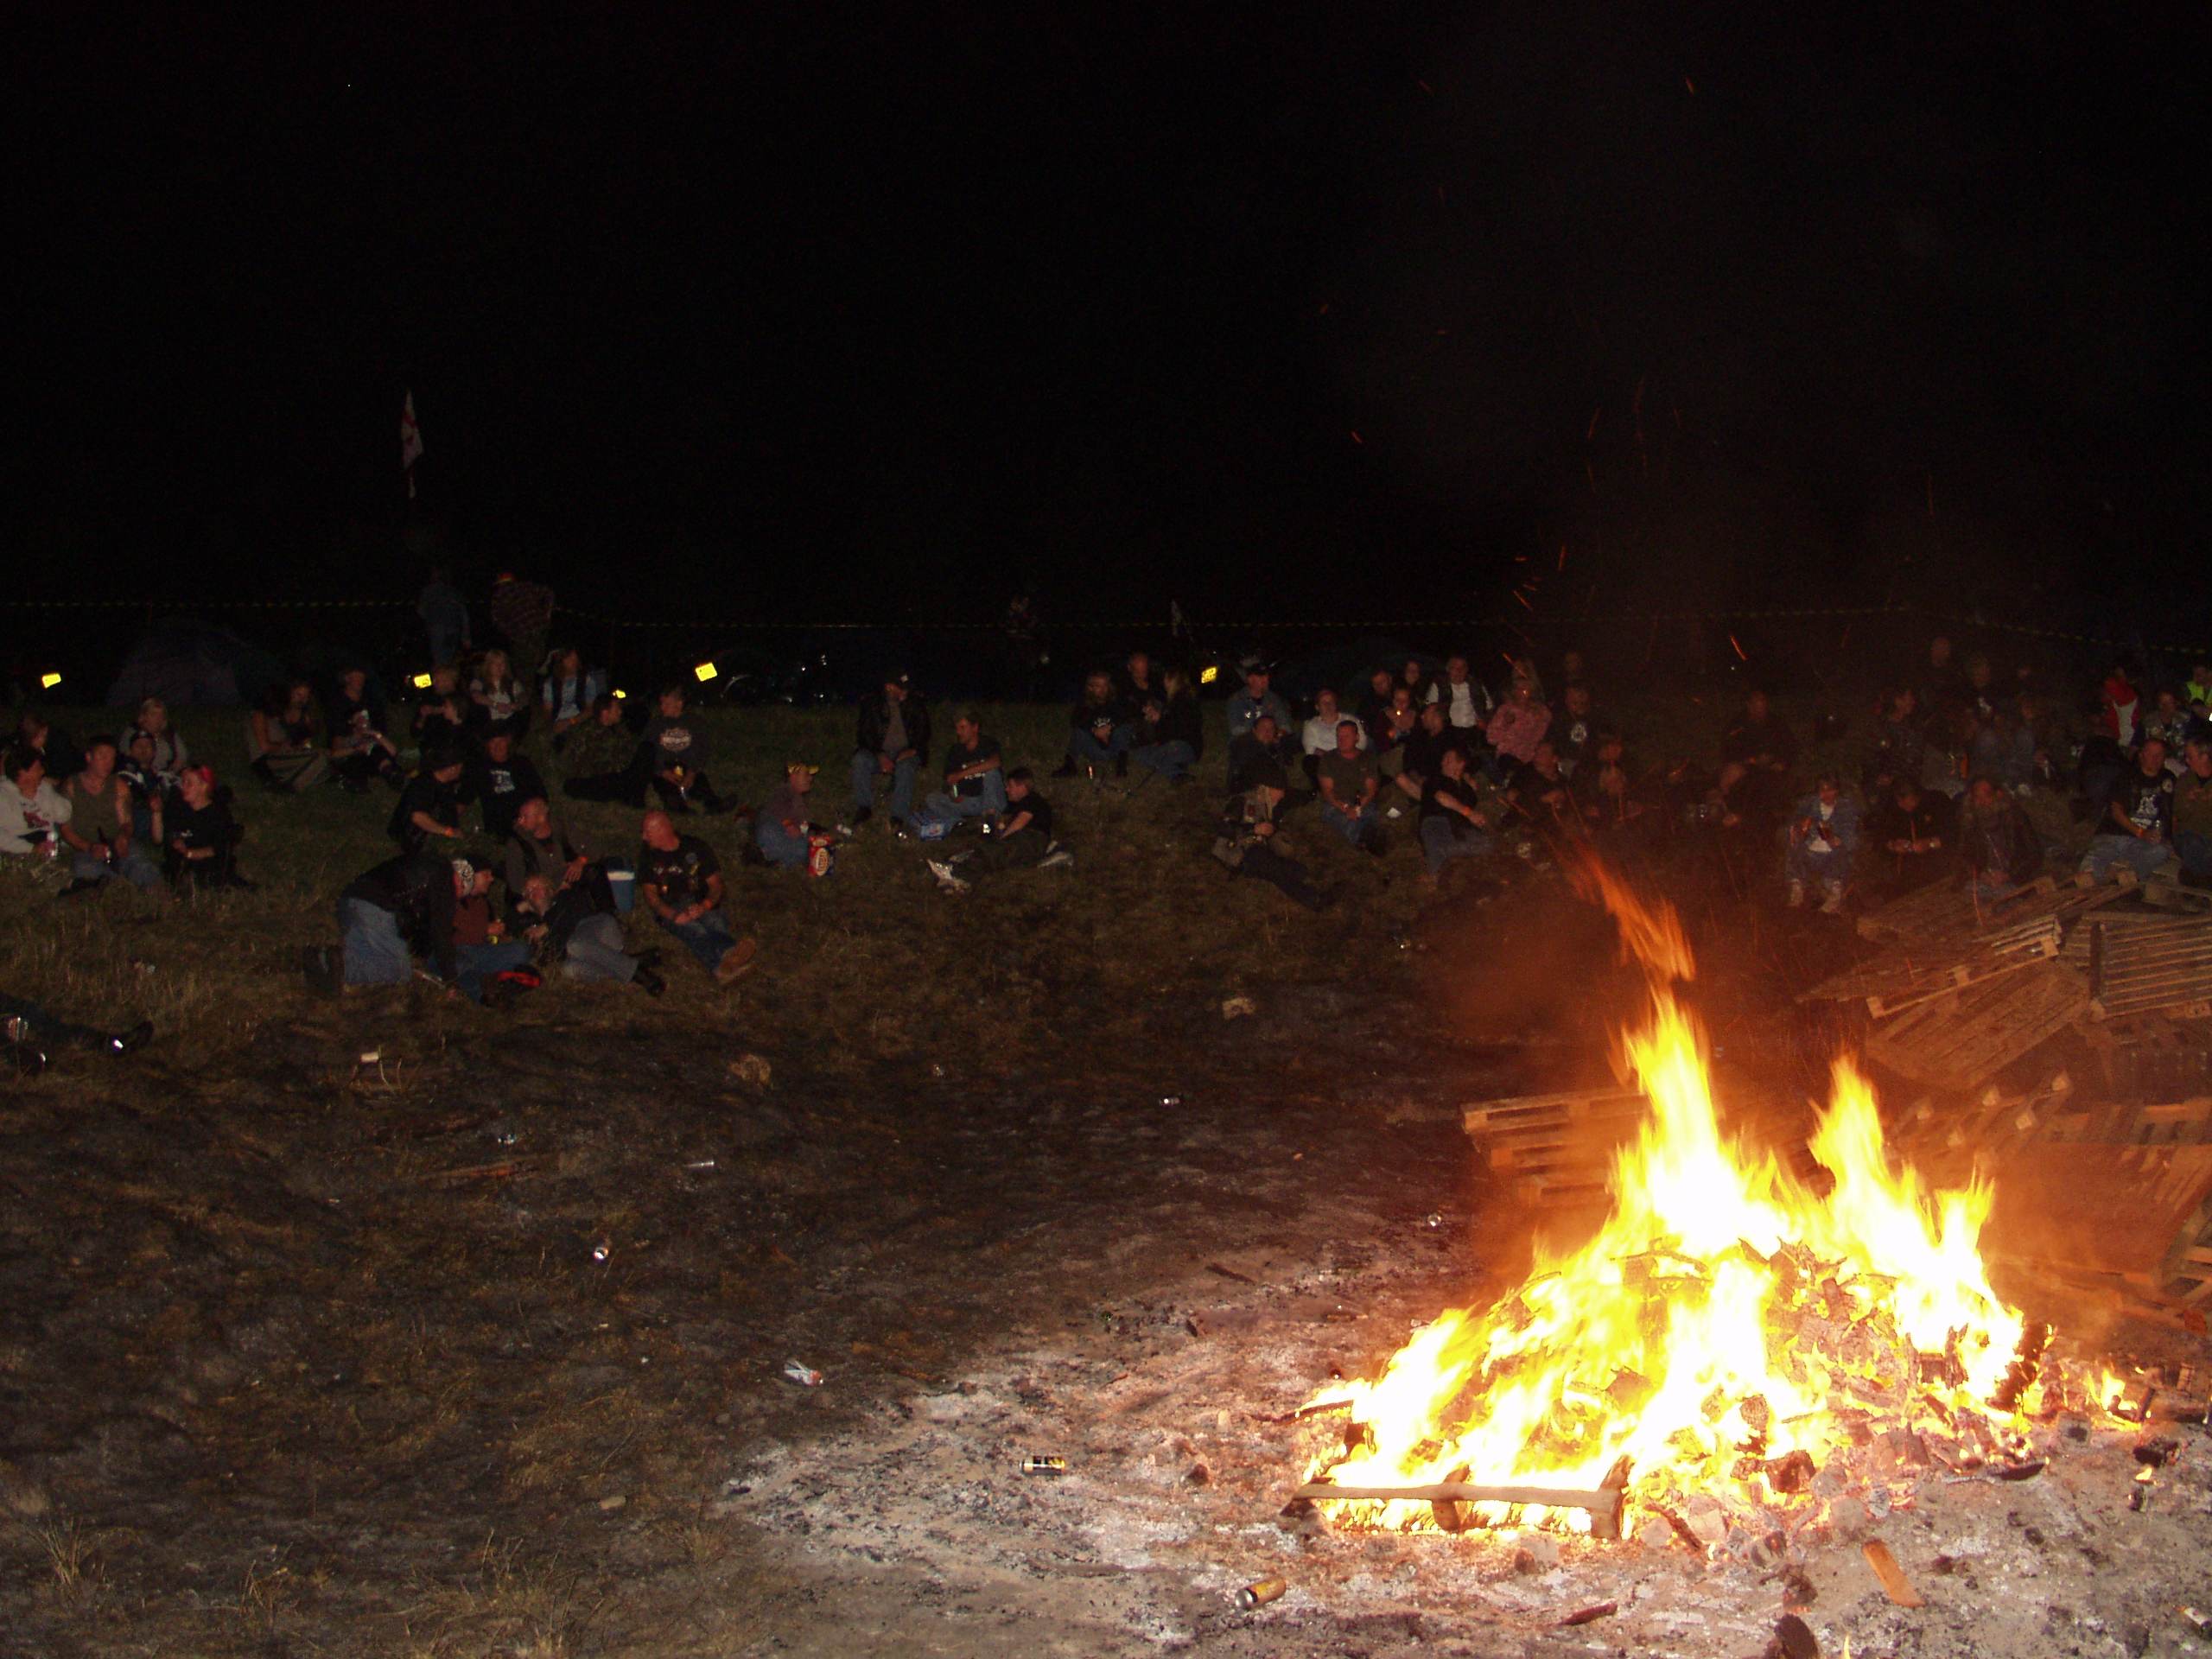 Saturdays Bonfire, which without the help of our Happy Rally Goers, wouldn't have happened